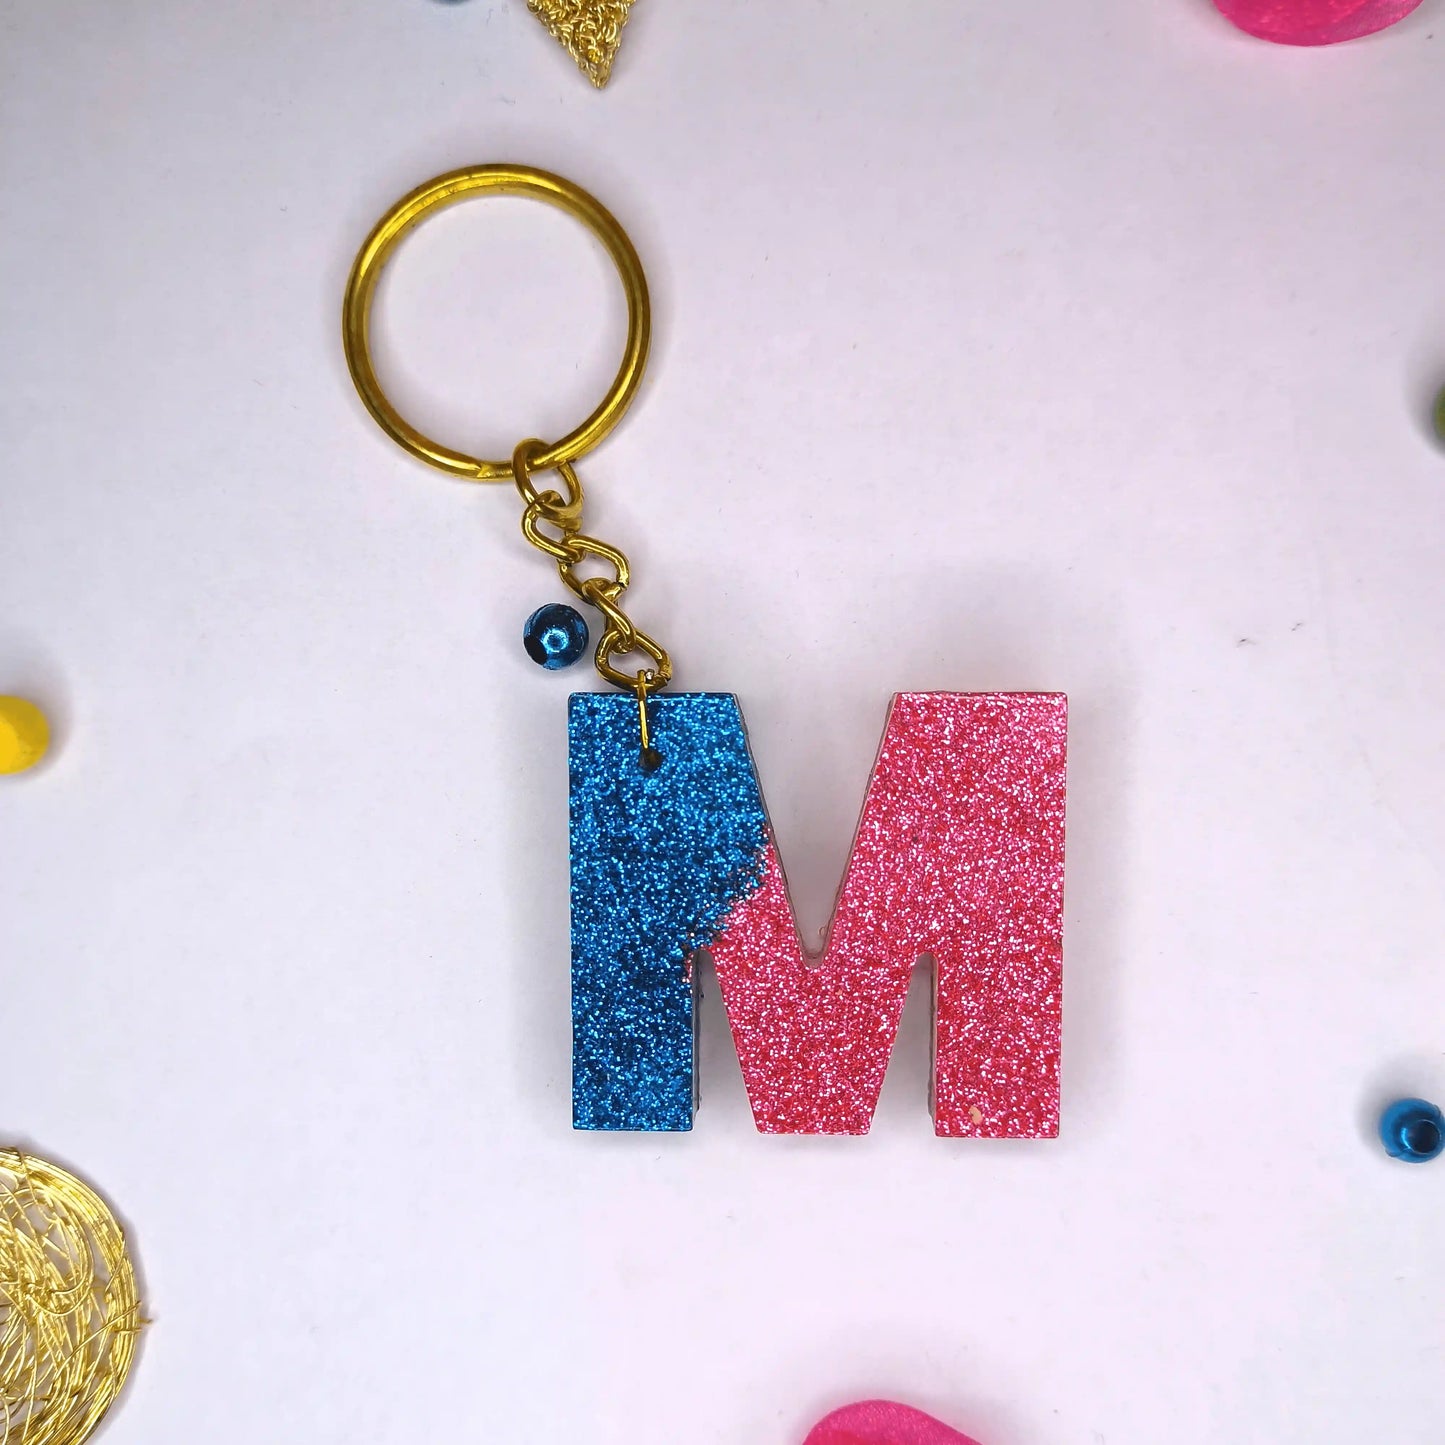 Buy Multi-color shine resin keychains with m Letter For Best Friend